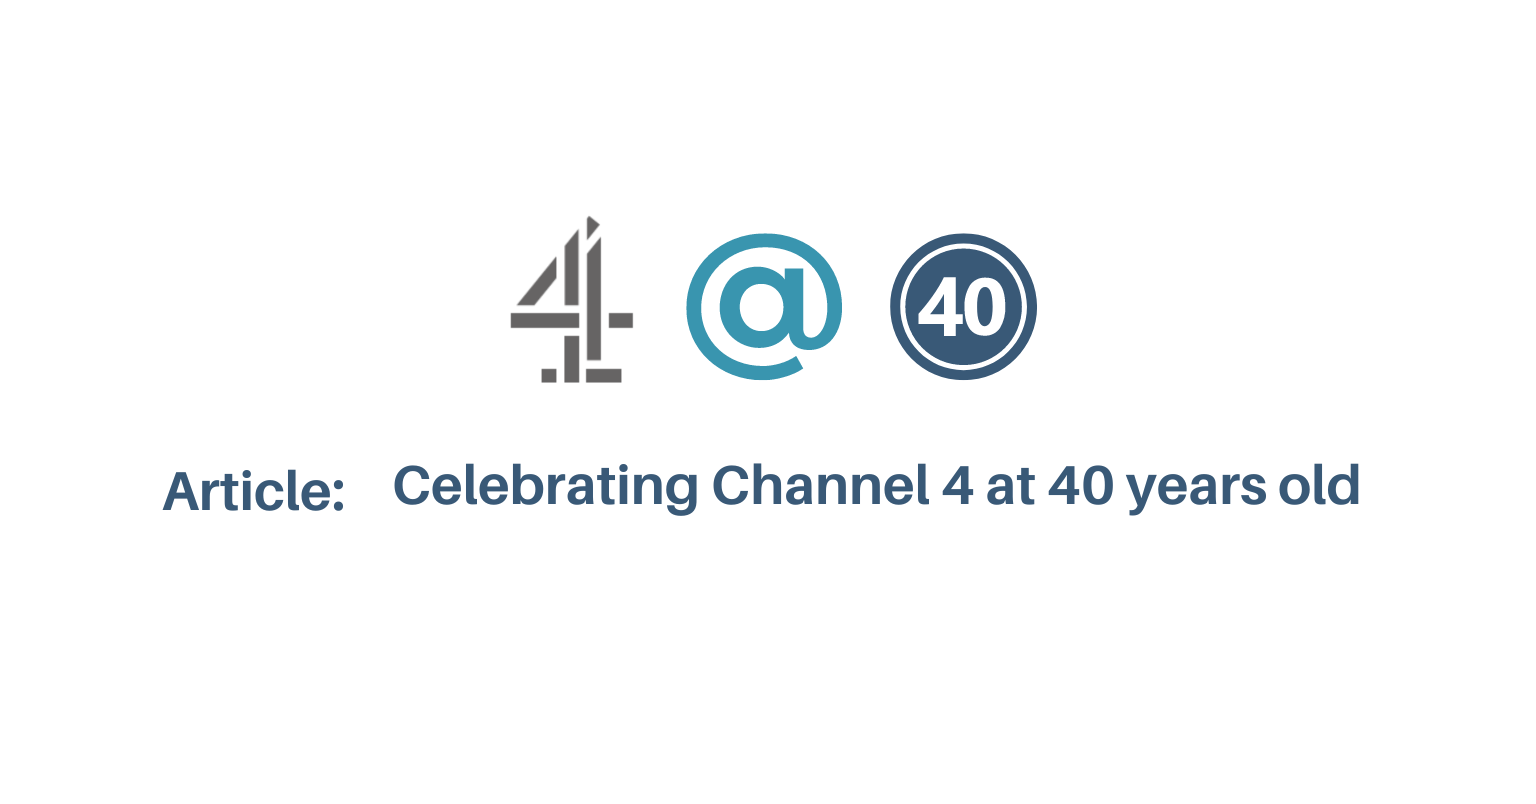 ARTICLE: CELEBRATING CHANNEL 4 AT 40 YEARS OLD